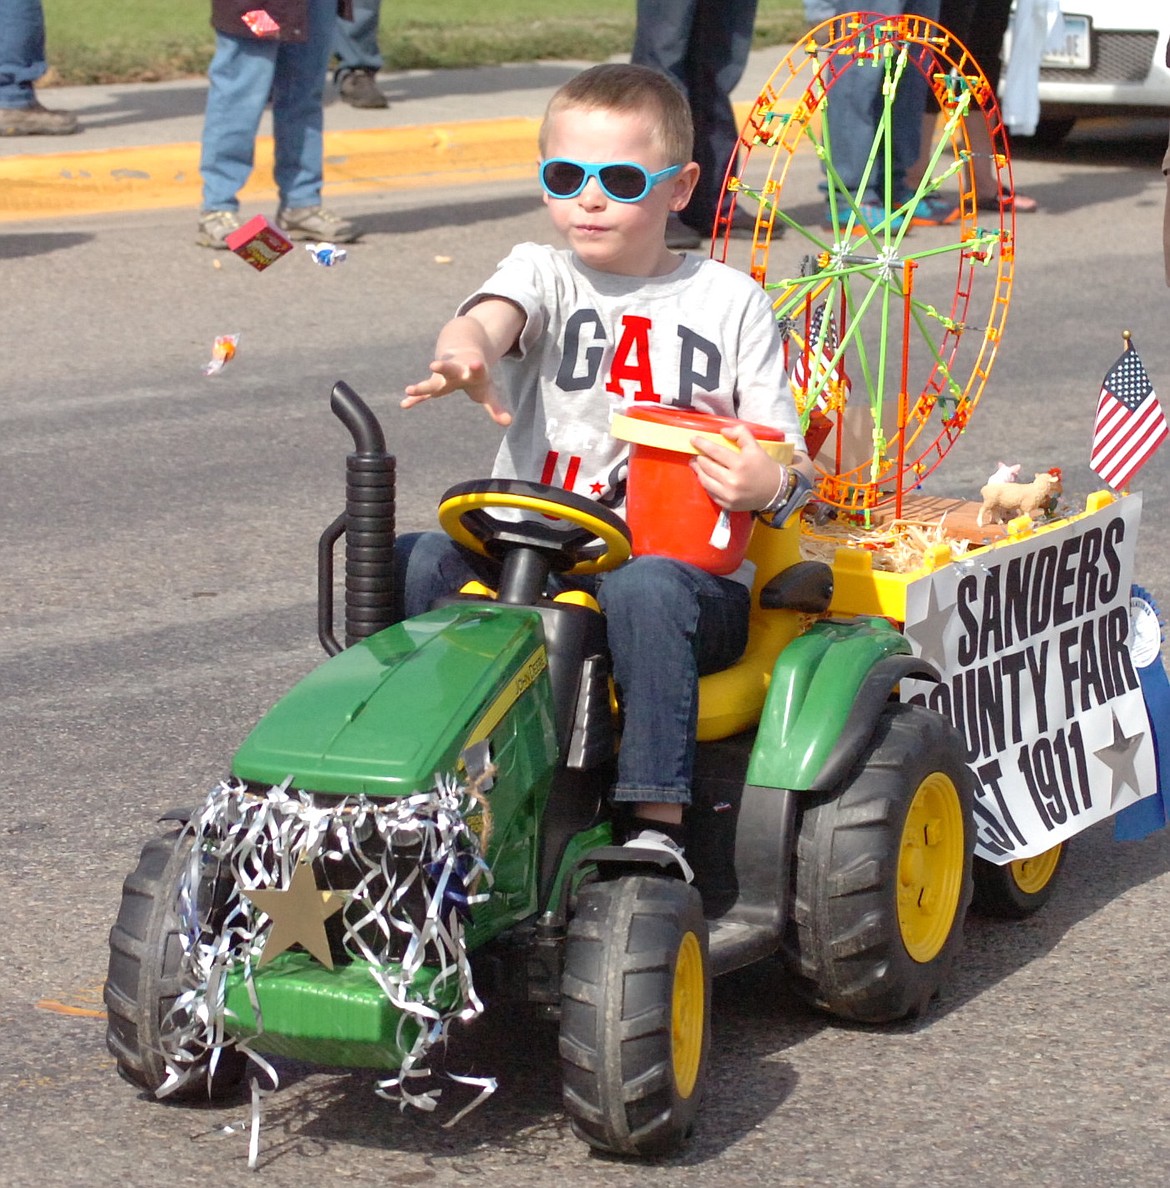 Six-year-old Decker Bates of Plains throws candy during the Sanders County Fair Parade on Saturday. It was Decker's fourth such parade on his electric tractor. (Joe Sova/Clark Fork Valley Press)